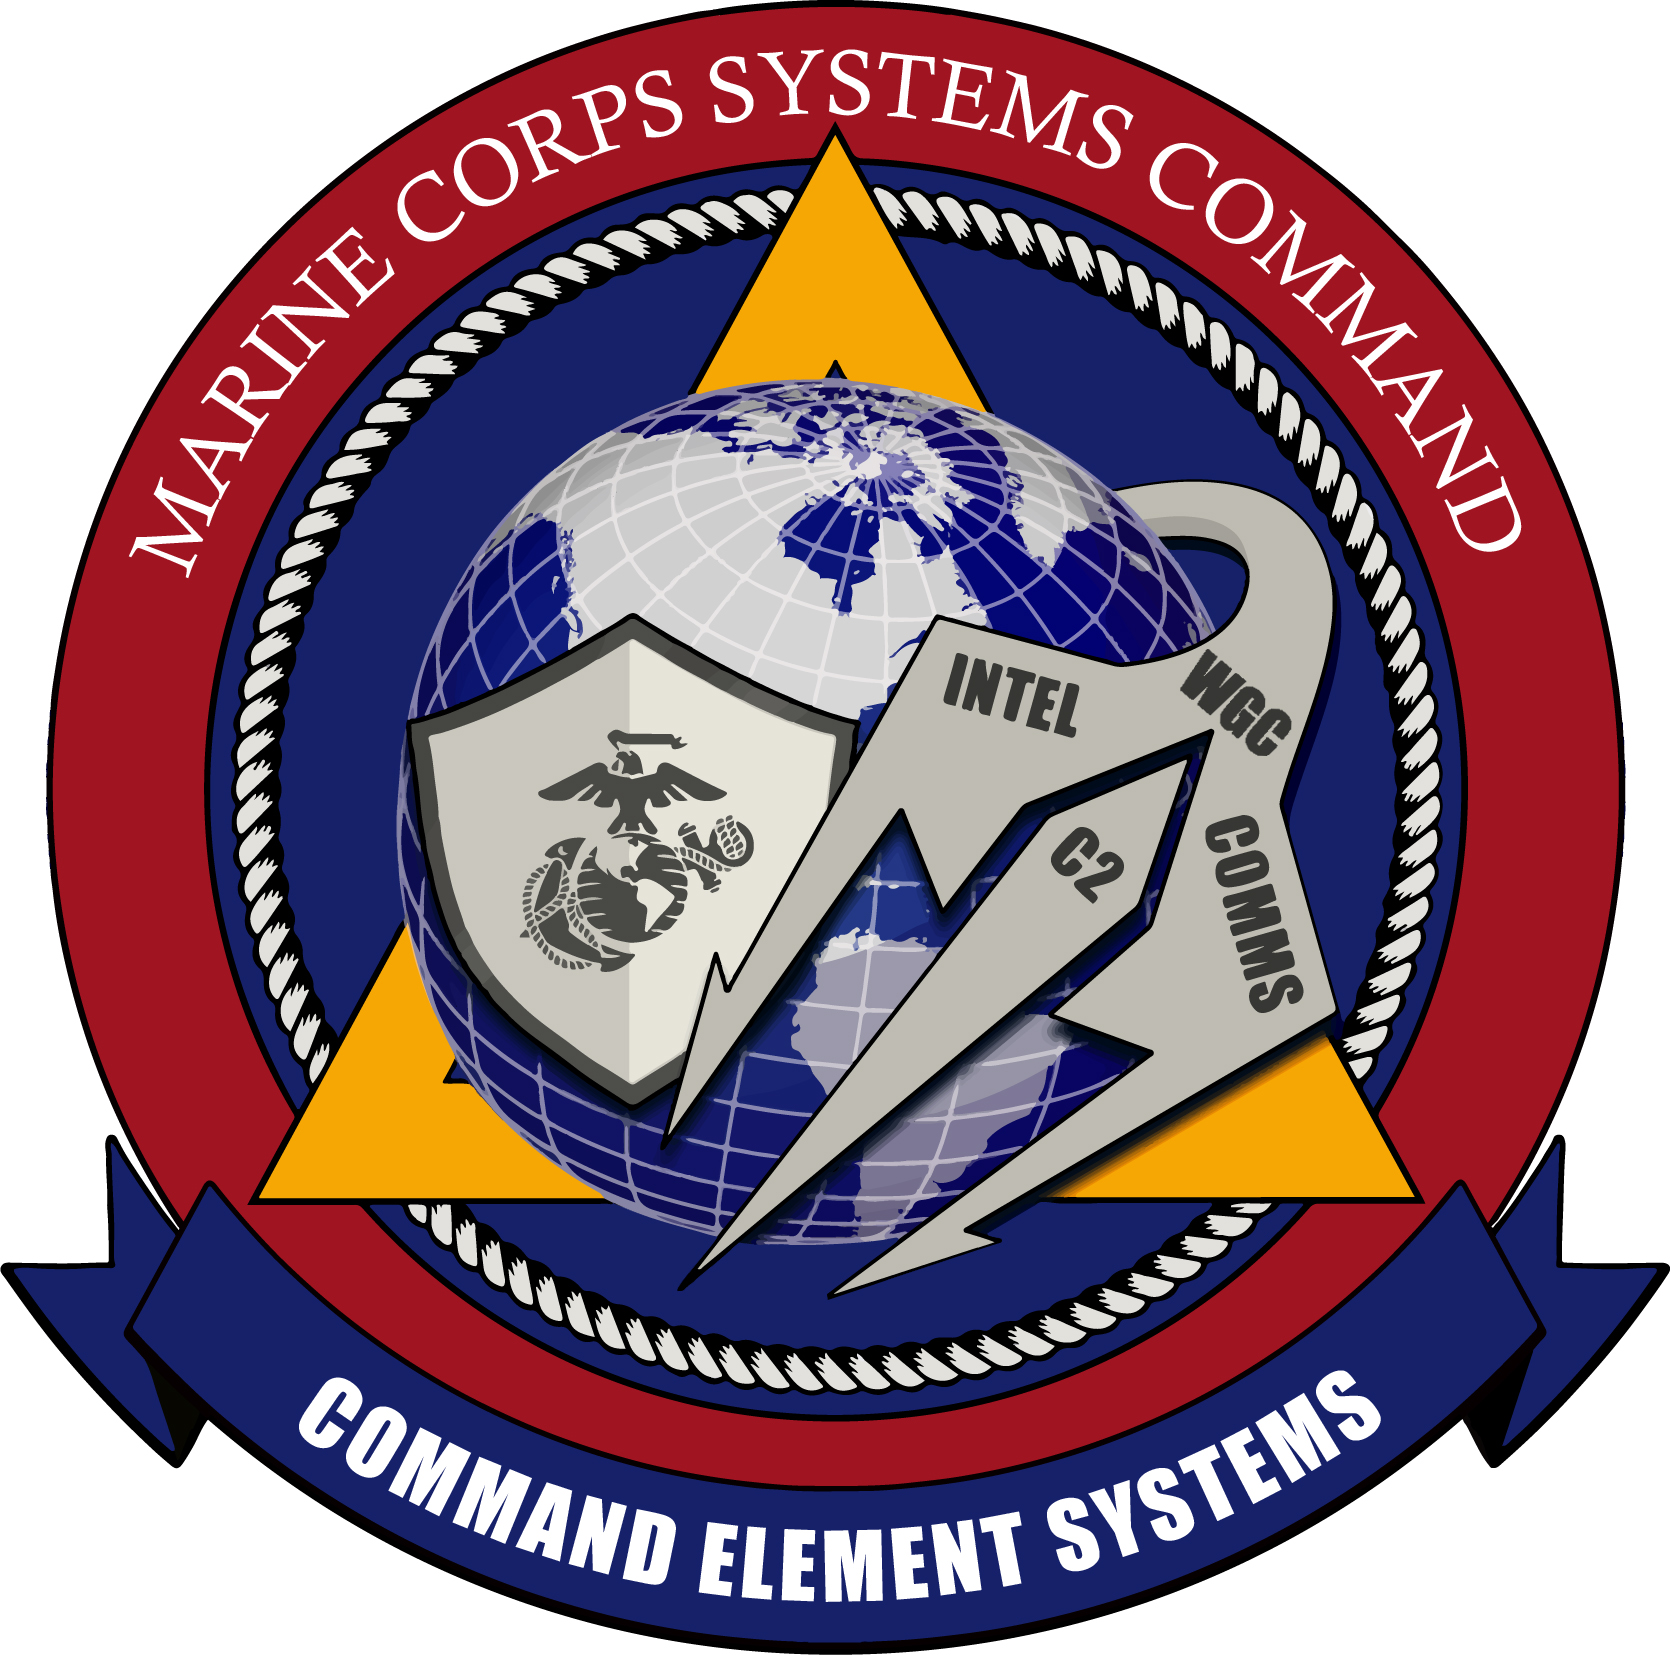 Command Element Systems marine corps systems command address